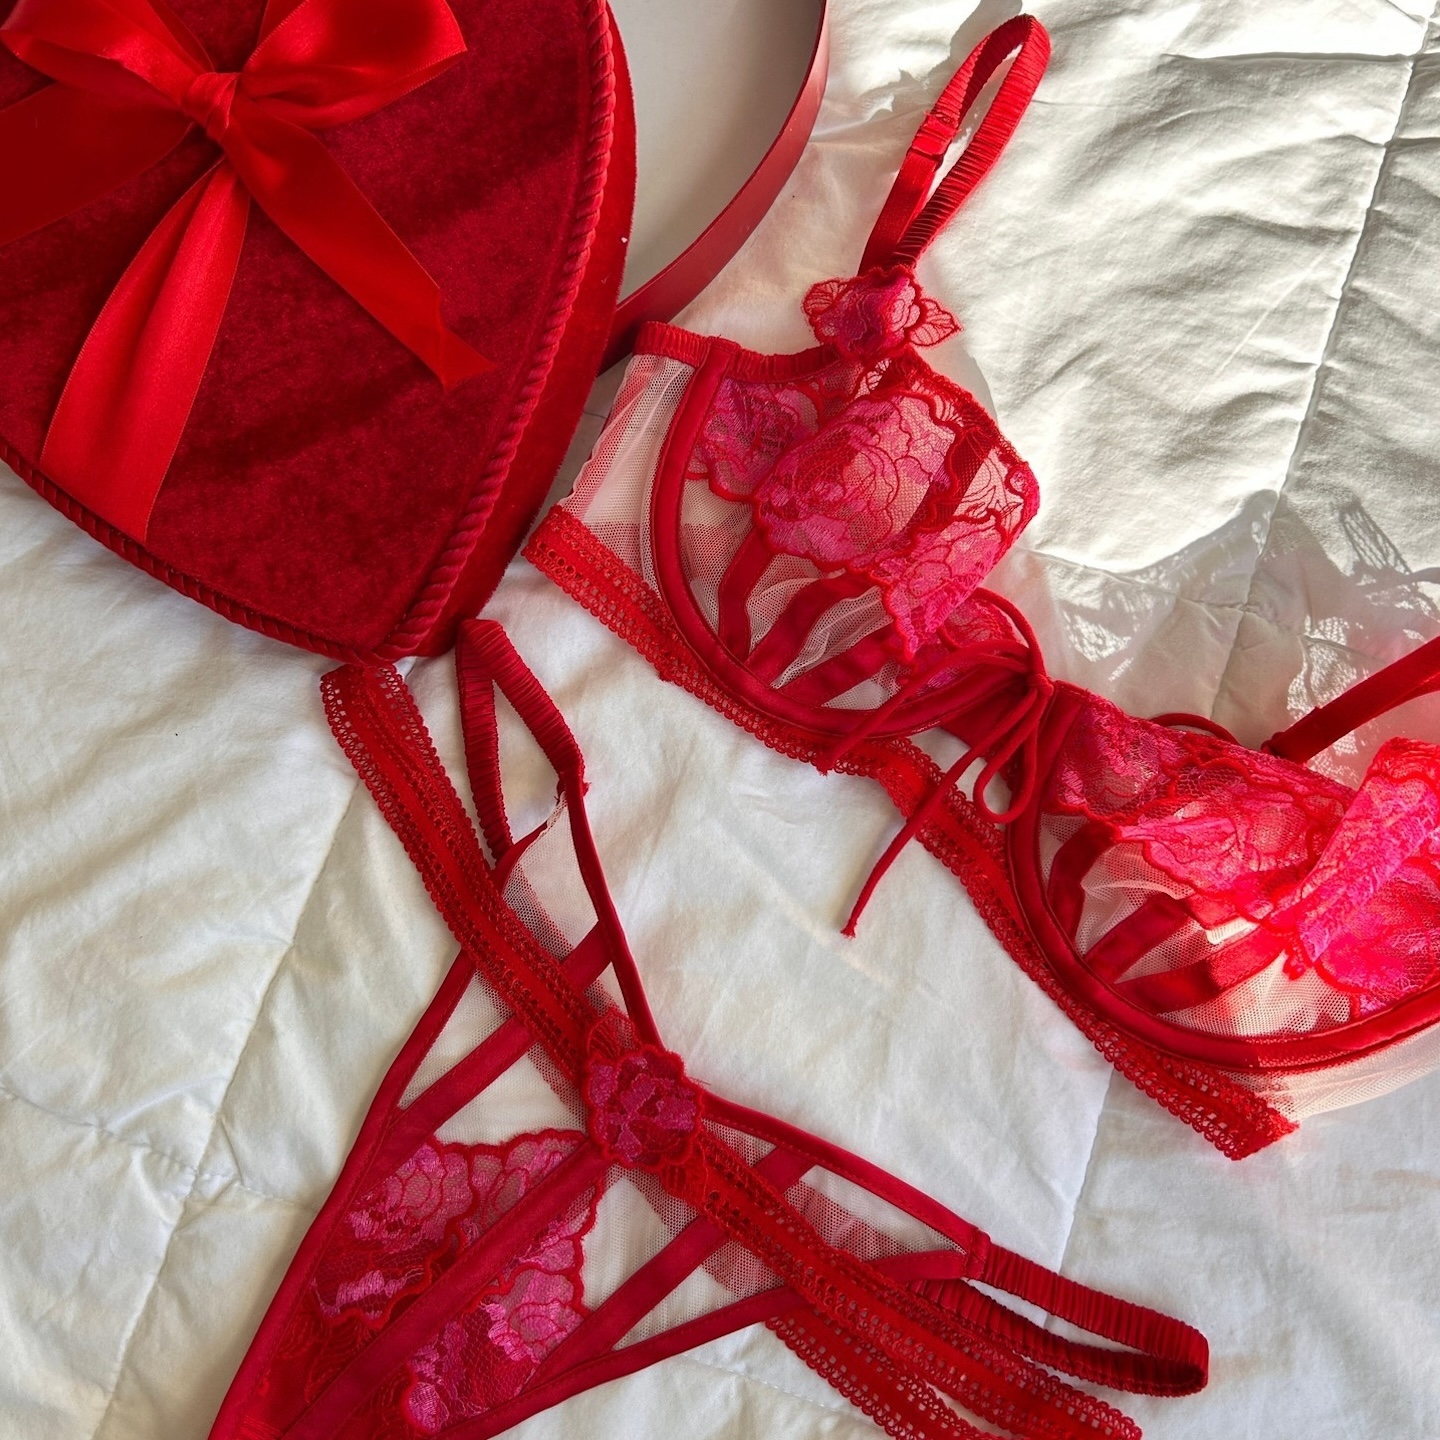 Couples Matching Underwear Sets Valentines Great Gifts - Panties, Facebook  Marketplace